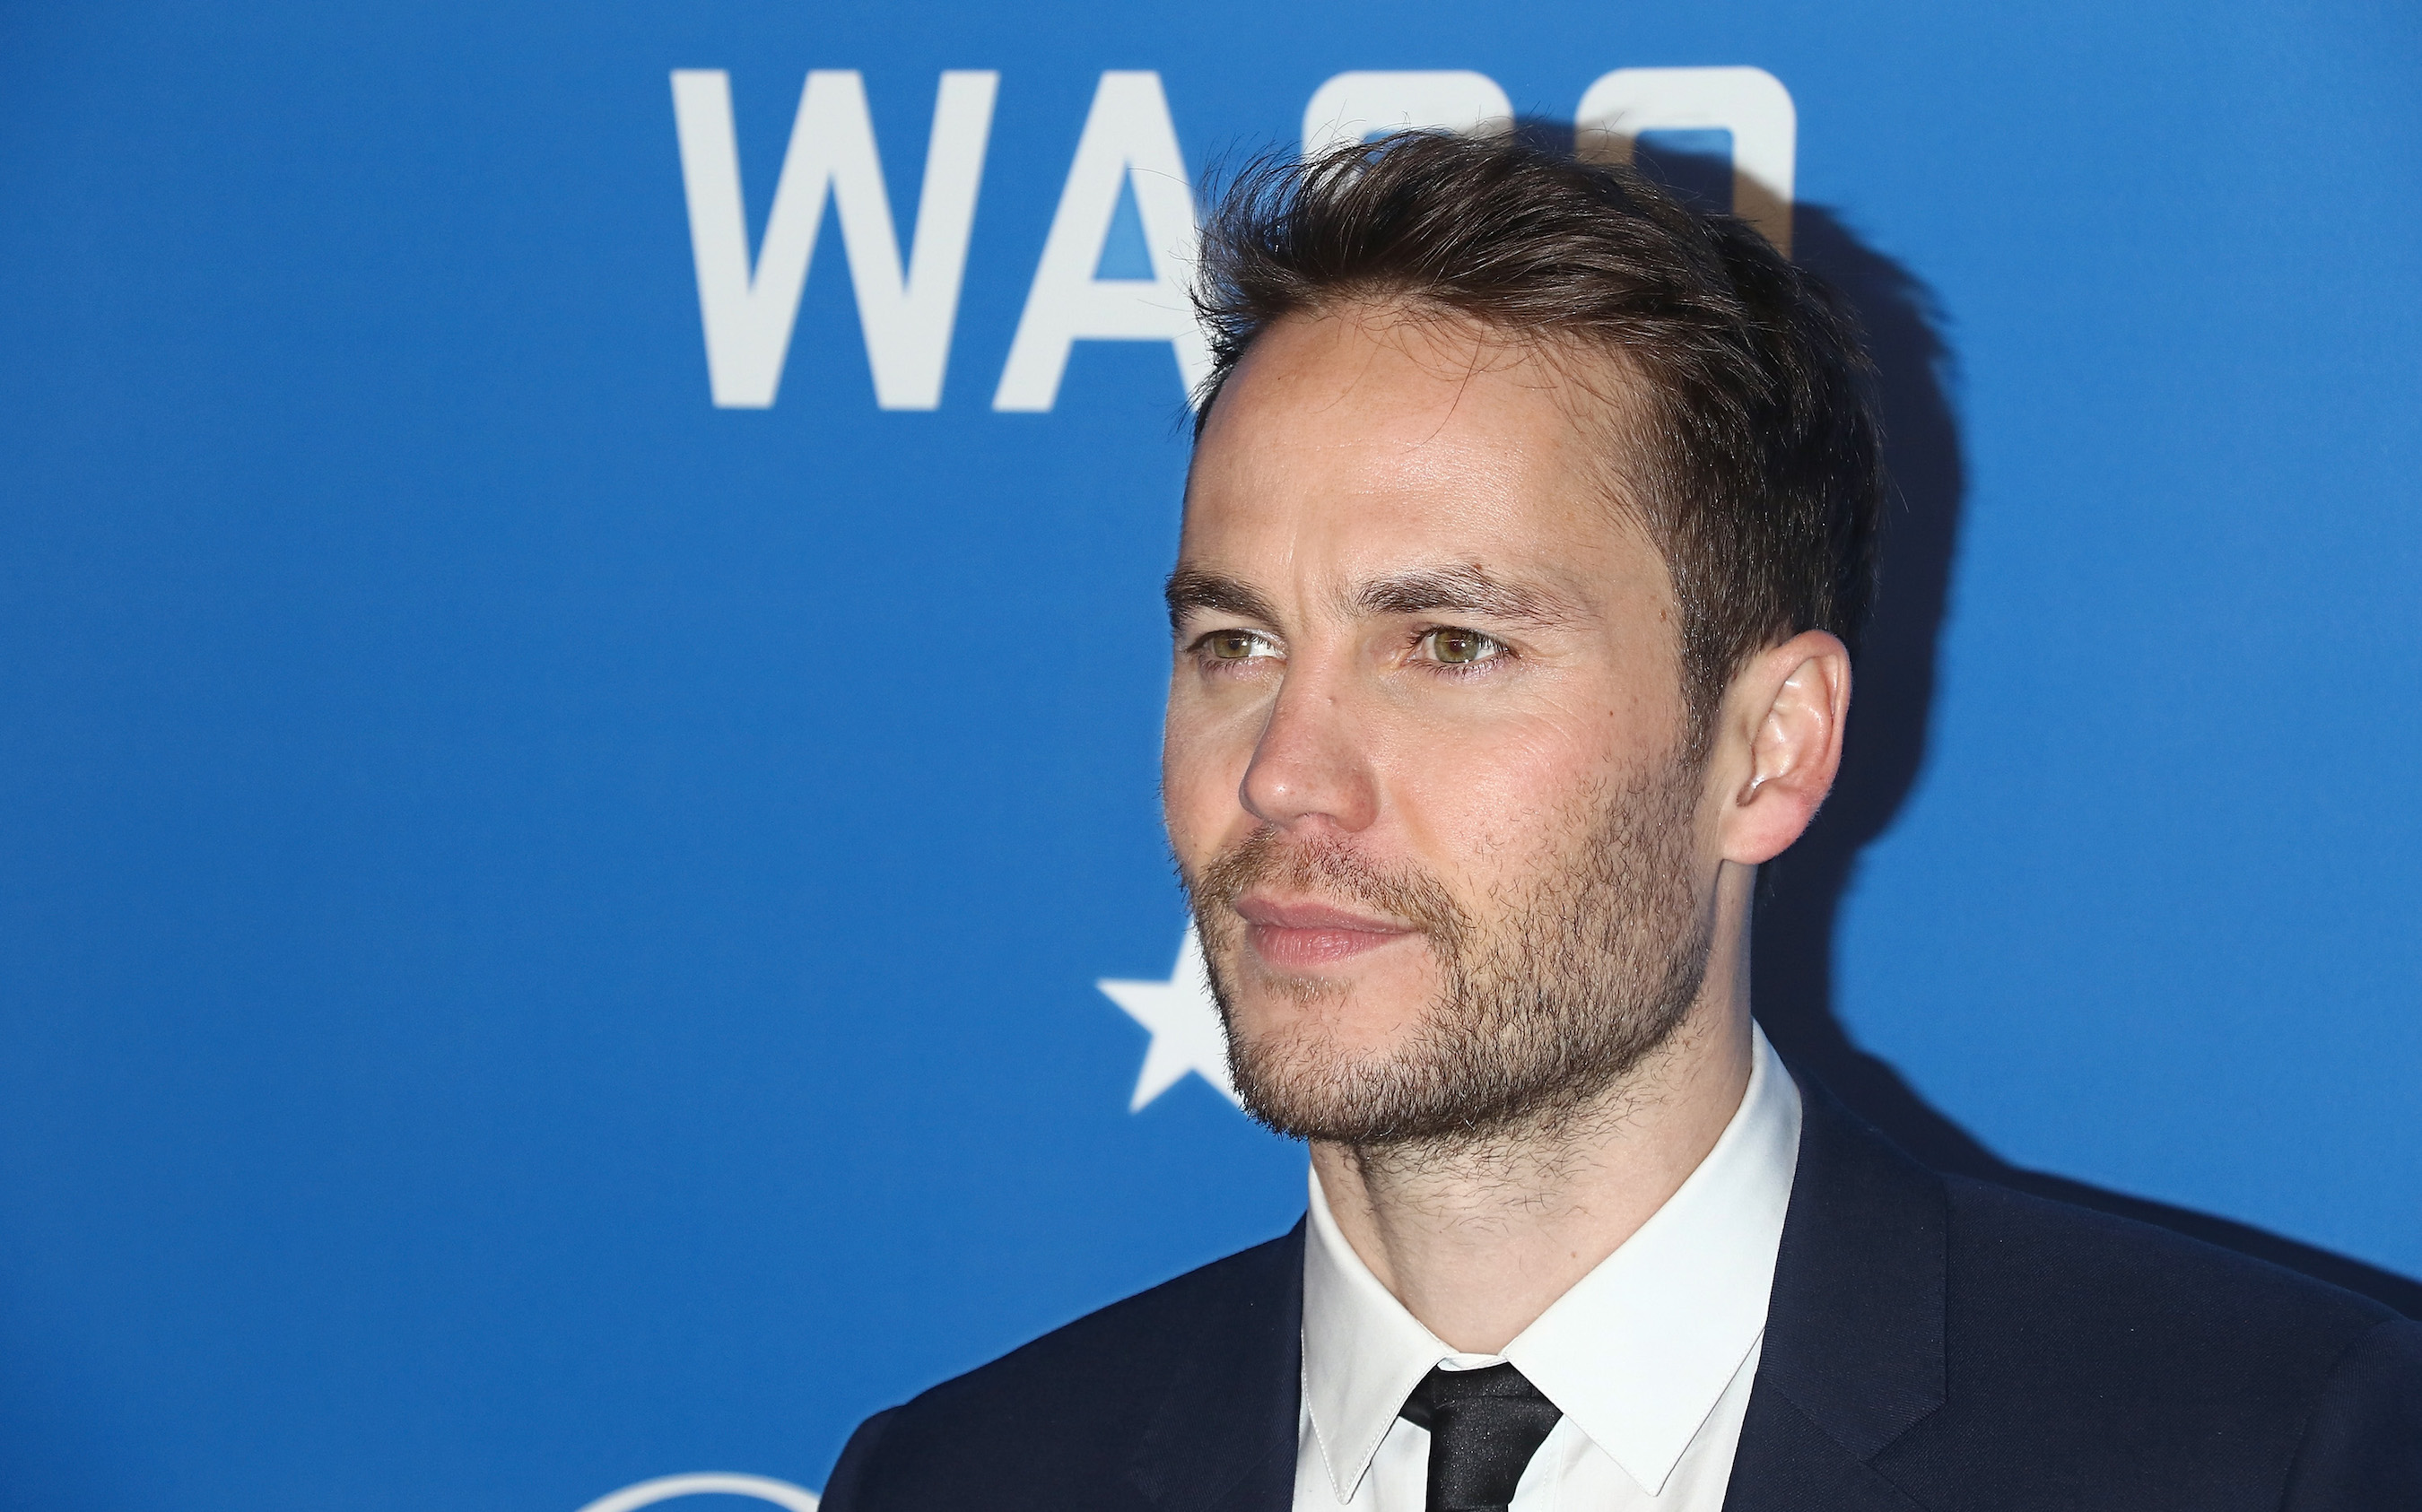 Actor Taylor Kitsch attends the "Waco" world premiere at Jazz at Lincoln Center on January 22, 2018 in New York City.  (Photo by Jim Spellman/WireImage)